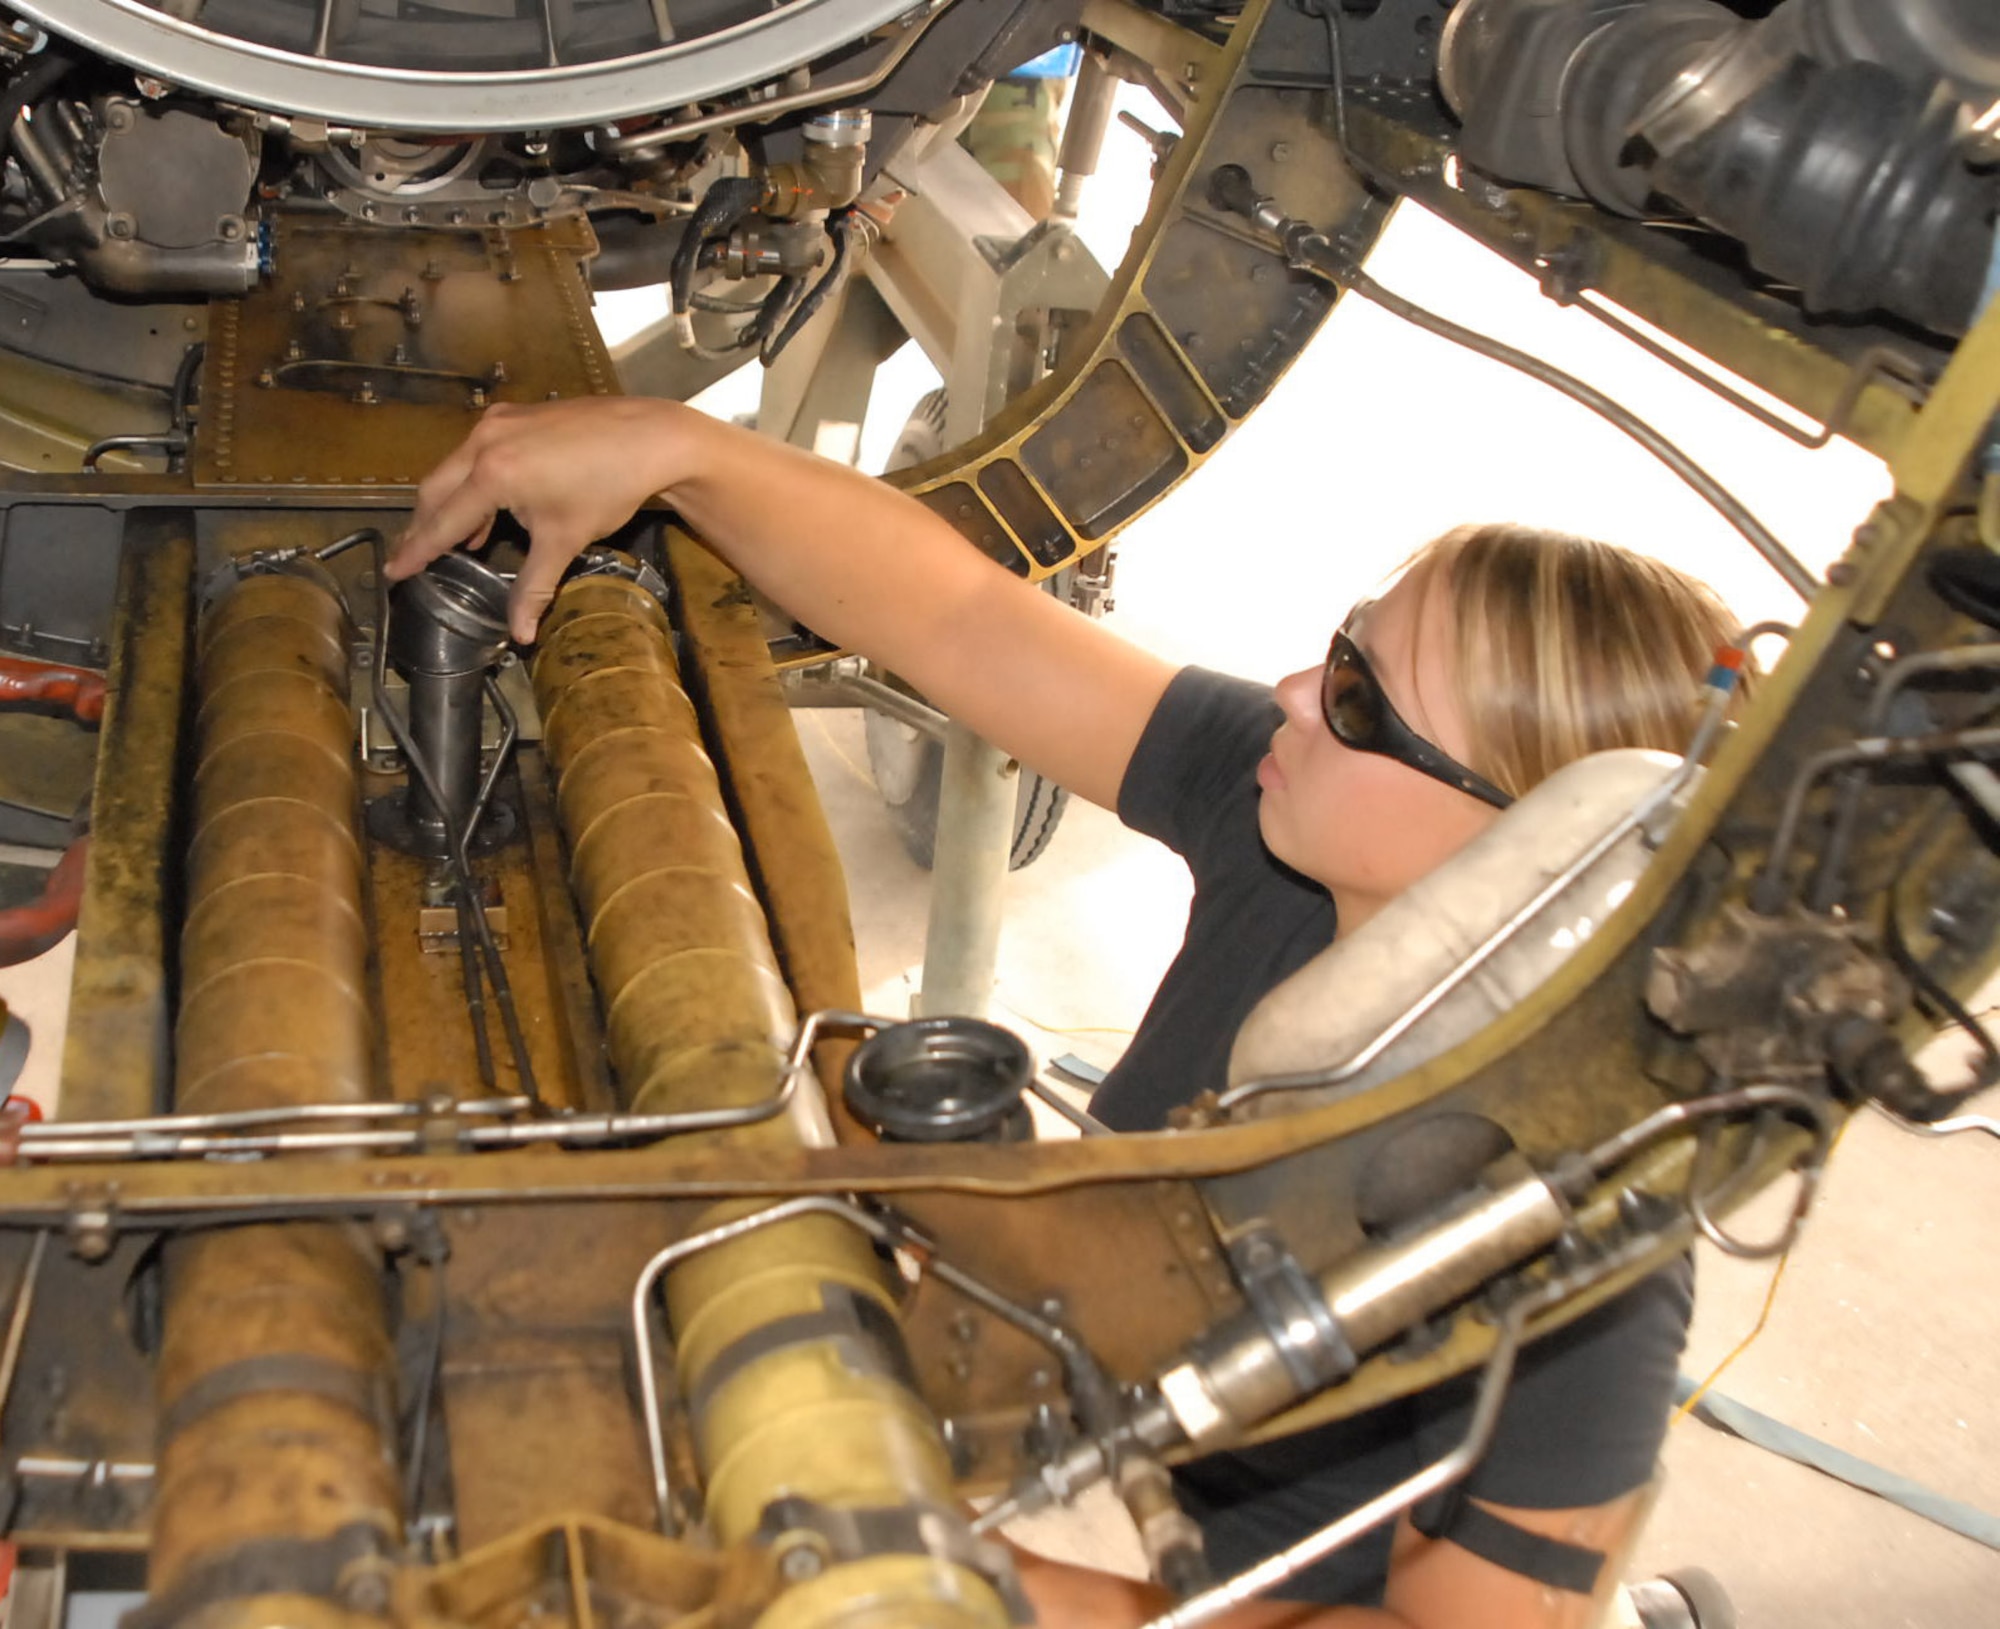 Airman 1st Class Lindsey Simpson, 62nd Aircraft Maintenance Unit assistant dedicated crew chief, removes a bellow adapter Monday from the inside of the engine bay on an F-16 Fighting Falcon. Removing the adapter aids in performing required inspections. Photo by Staff Sgt. Phillip Butterfield
